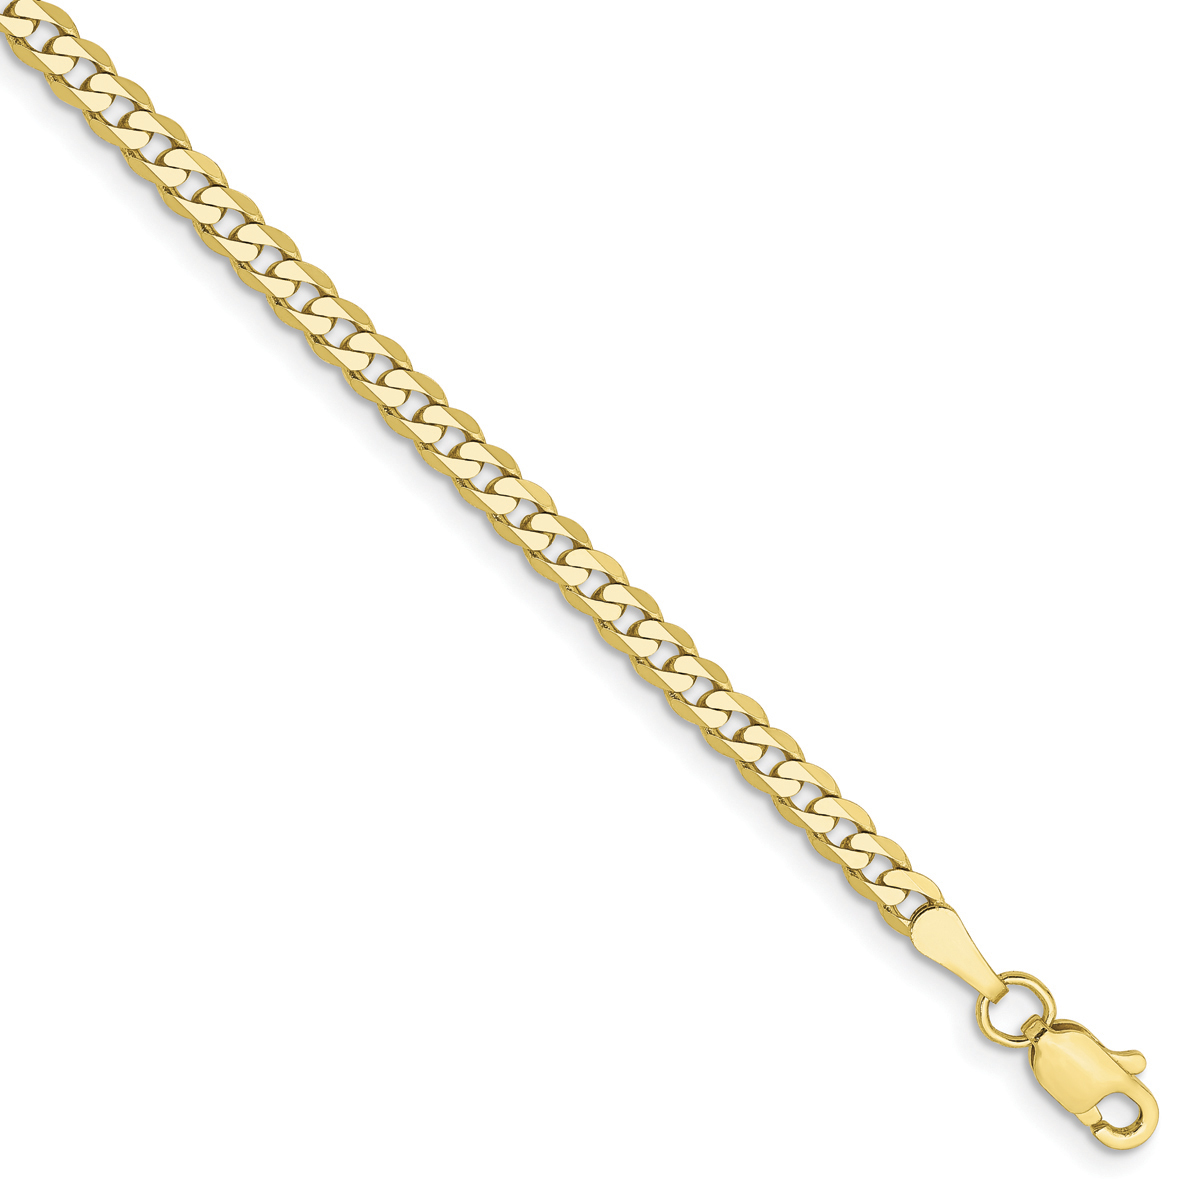 Unisex Gold Classics(tm) 10kt. 2.9mm 18in. Flat Bevel Chain Necklace